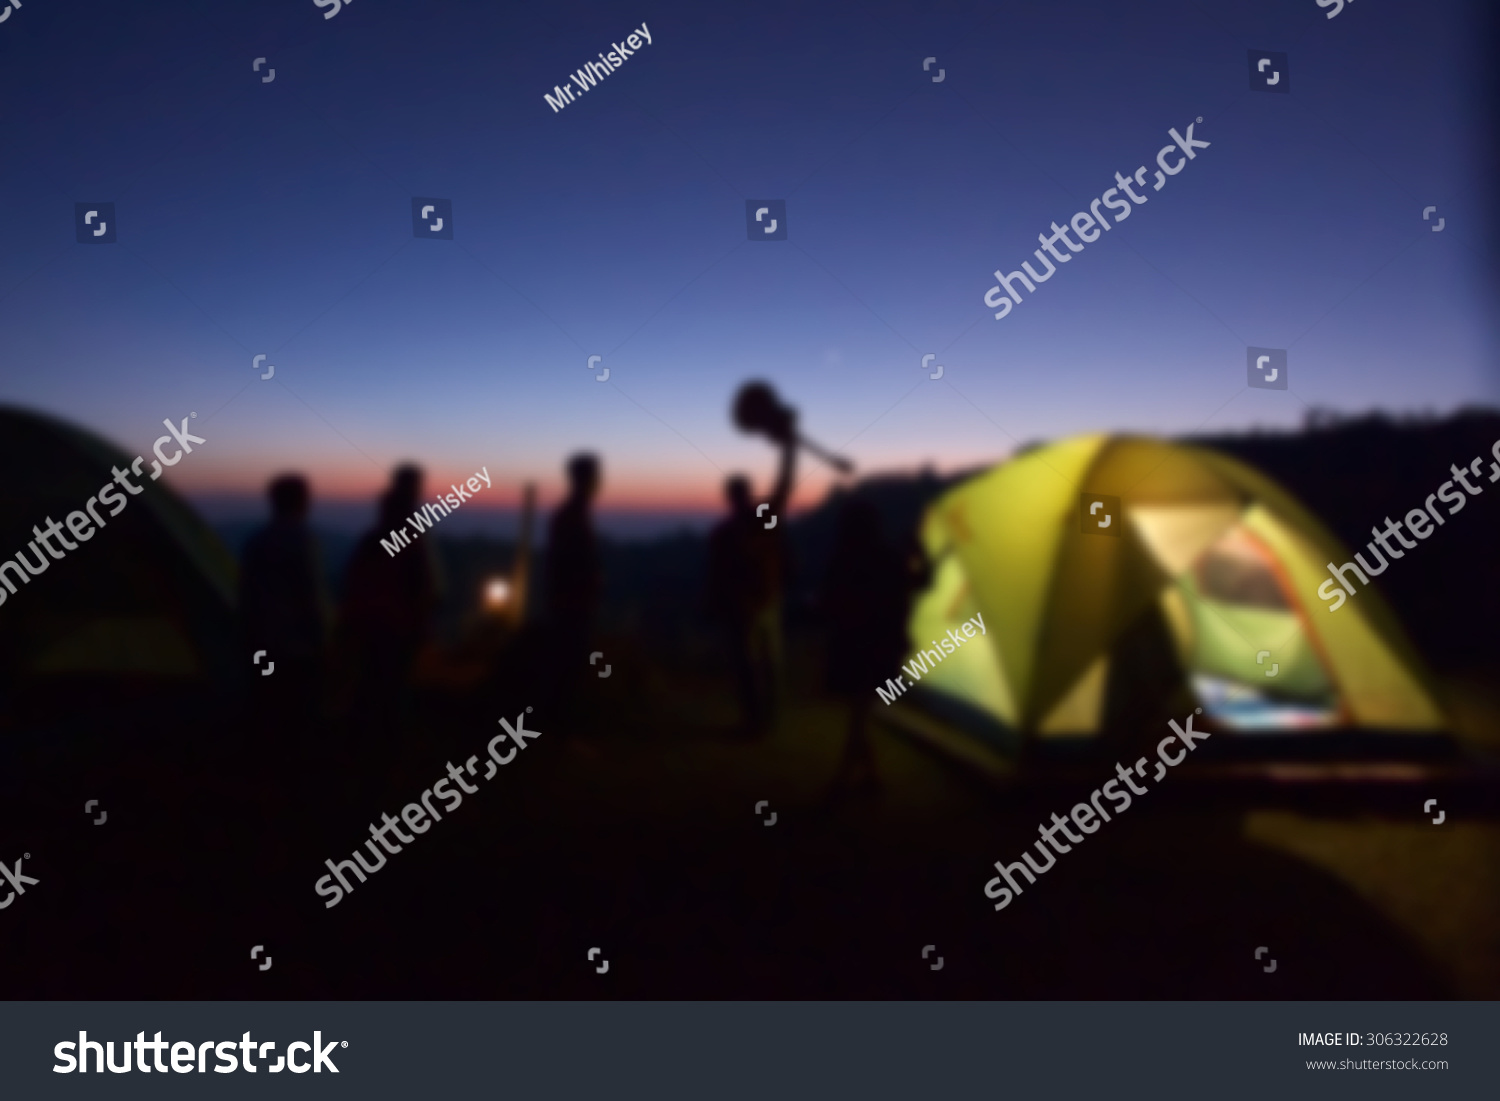 Blured at night camping background. #306322628